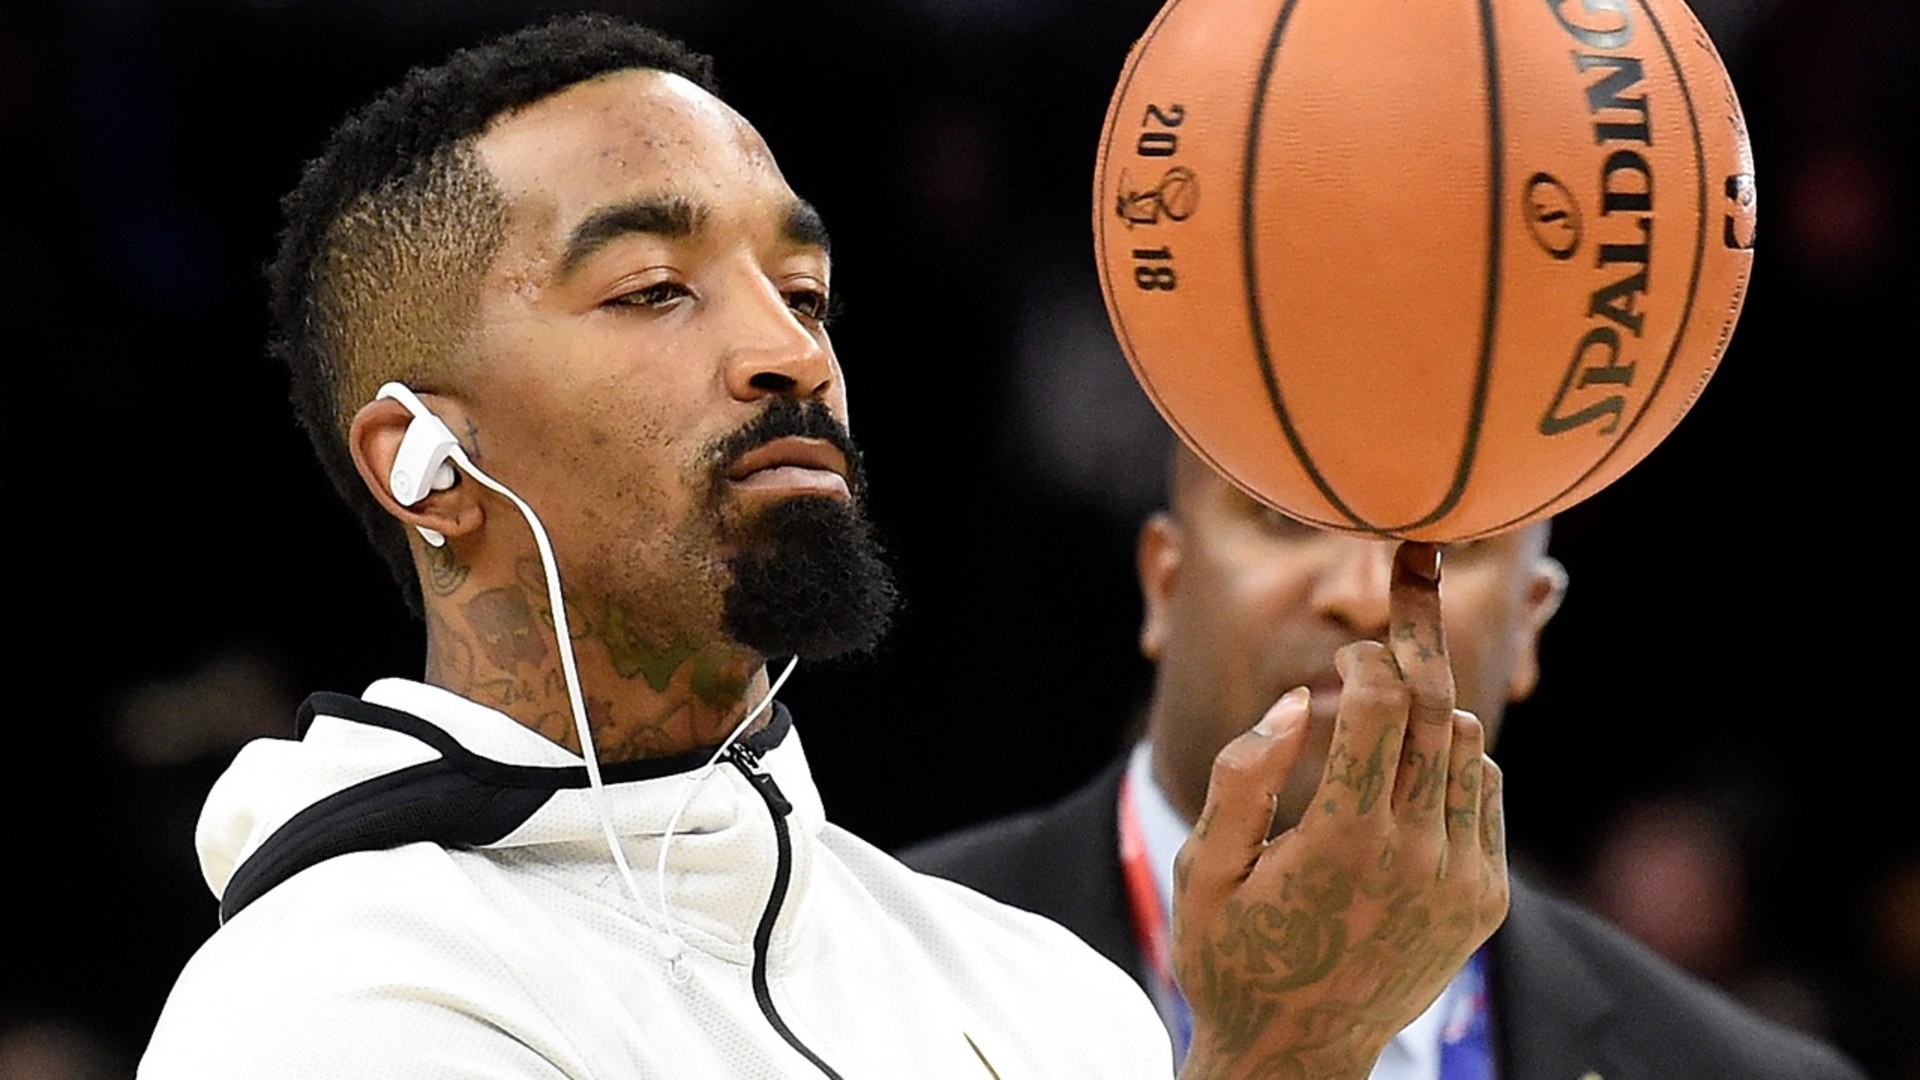 1920x1080 J.R. Smith Leaves the Cavs, Will Work On Being Traded After Slamming Team  for Tanking